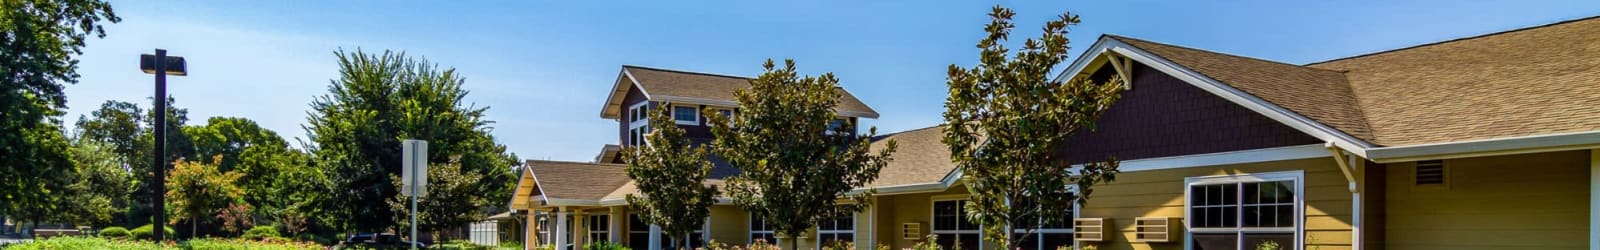 Testimonials of Amber Grove Place in Chico, California. 